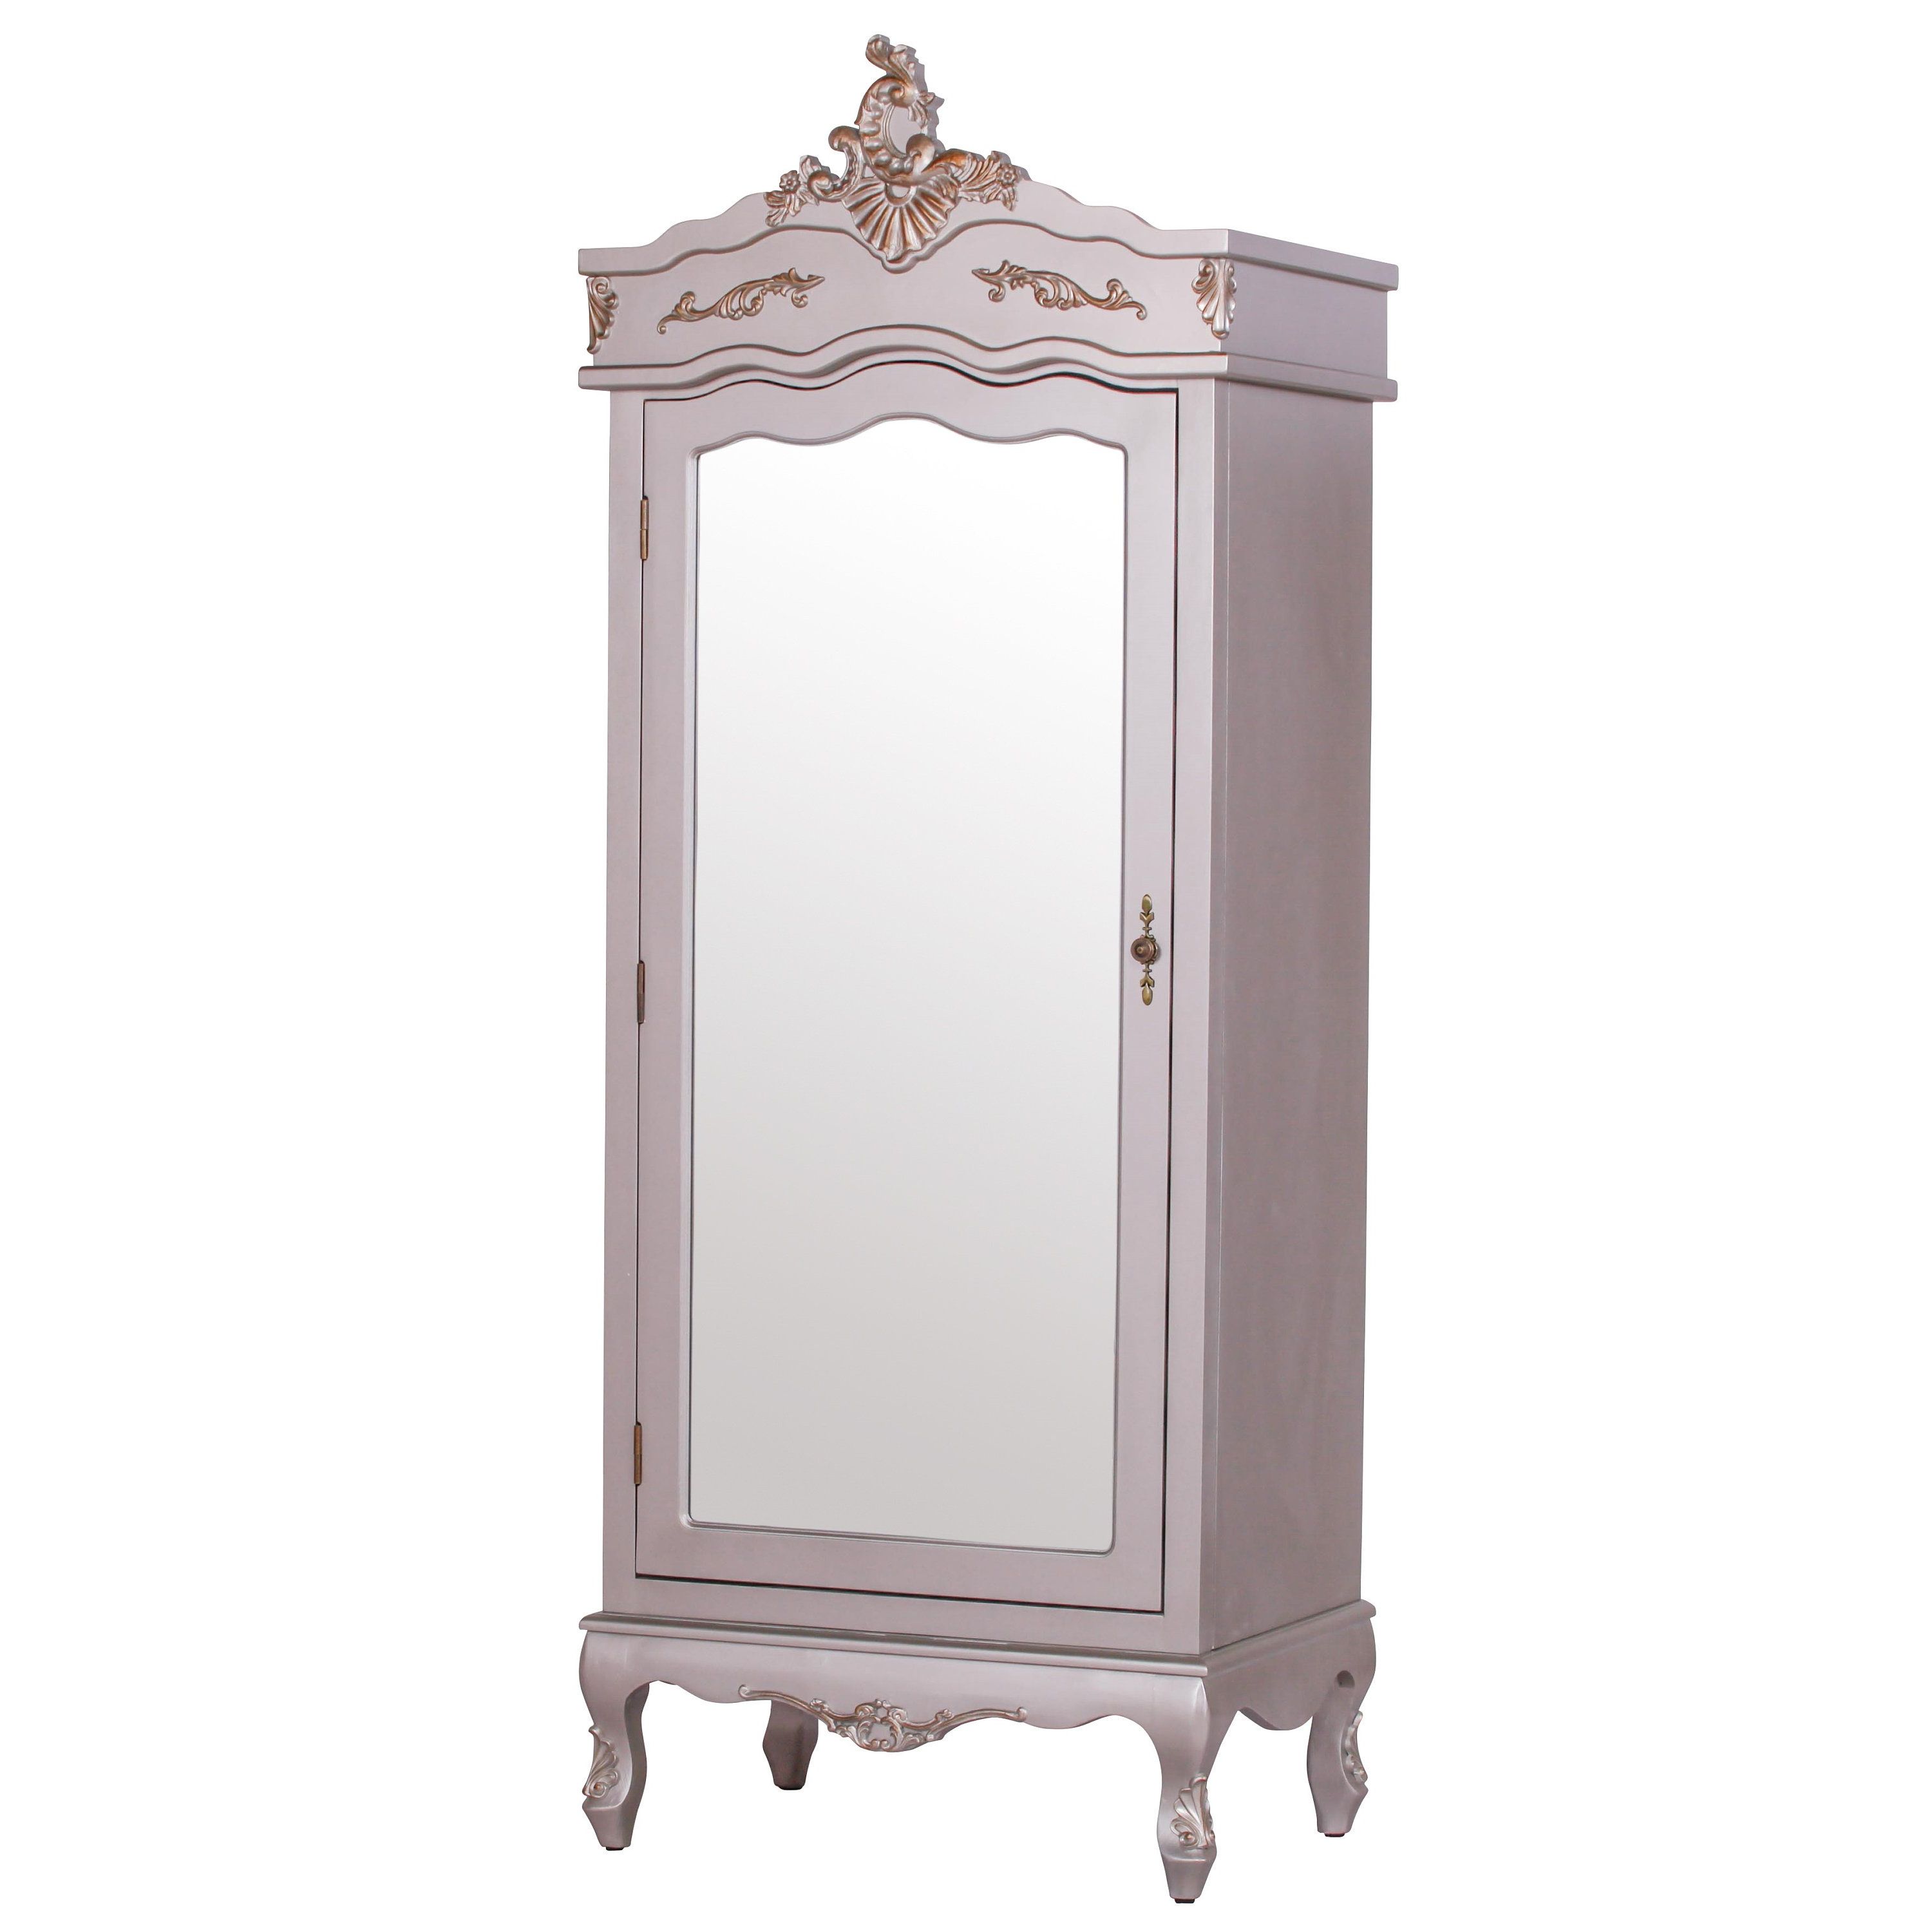 Antique French Style Full Mirror Single Door Armoire Wardrobe – Etsy Uk With Regard To Single French Wardrobes (View 11 of 20)